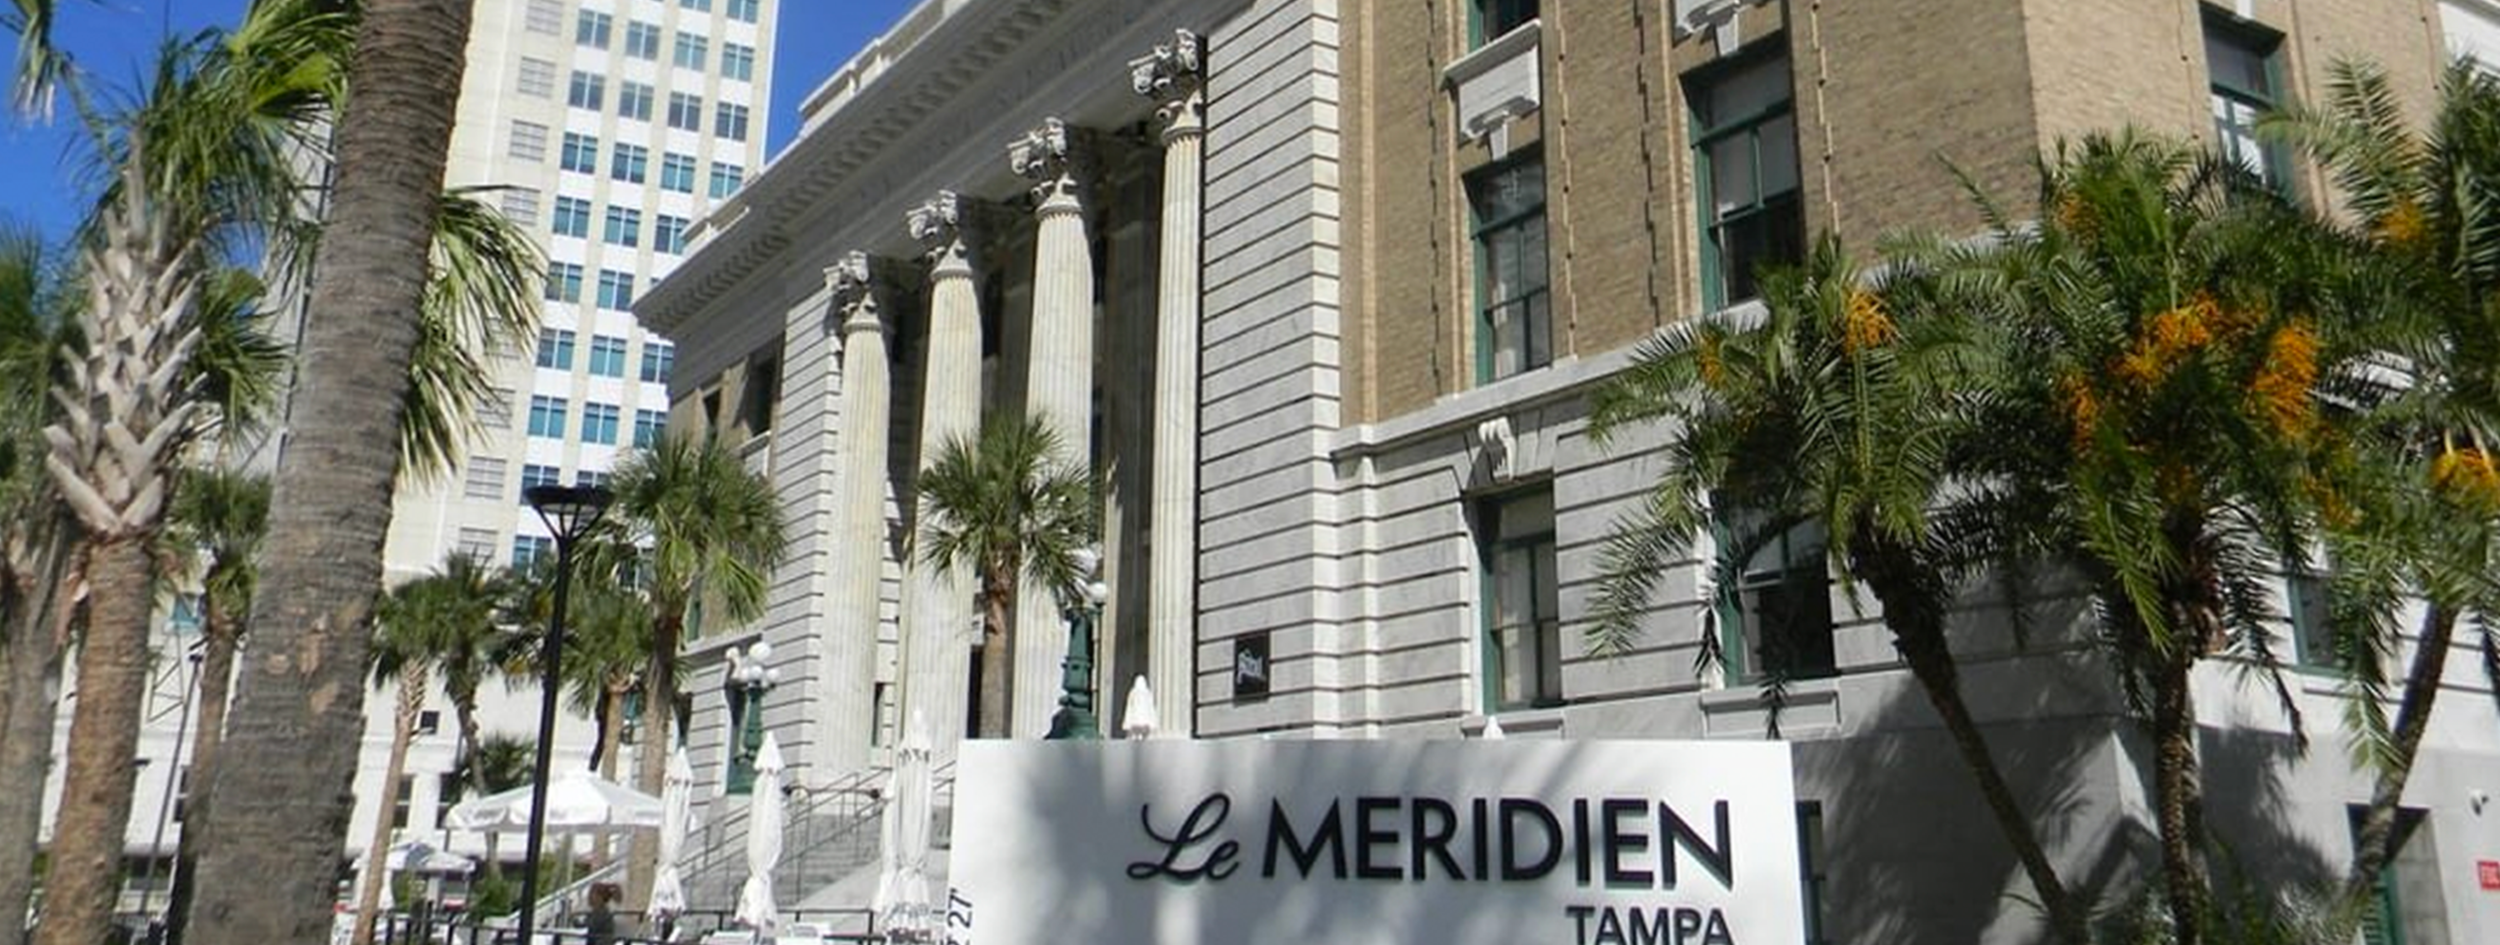 Le Meridien Hotel (Tampa Federal Courthouse)